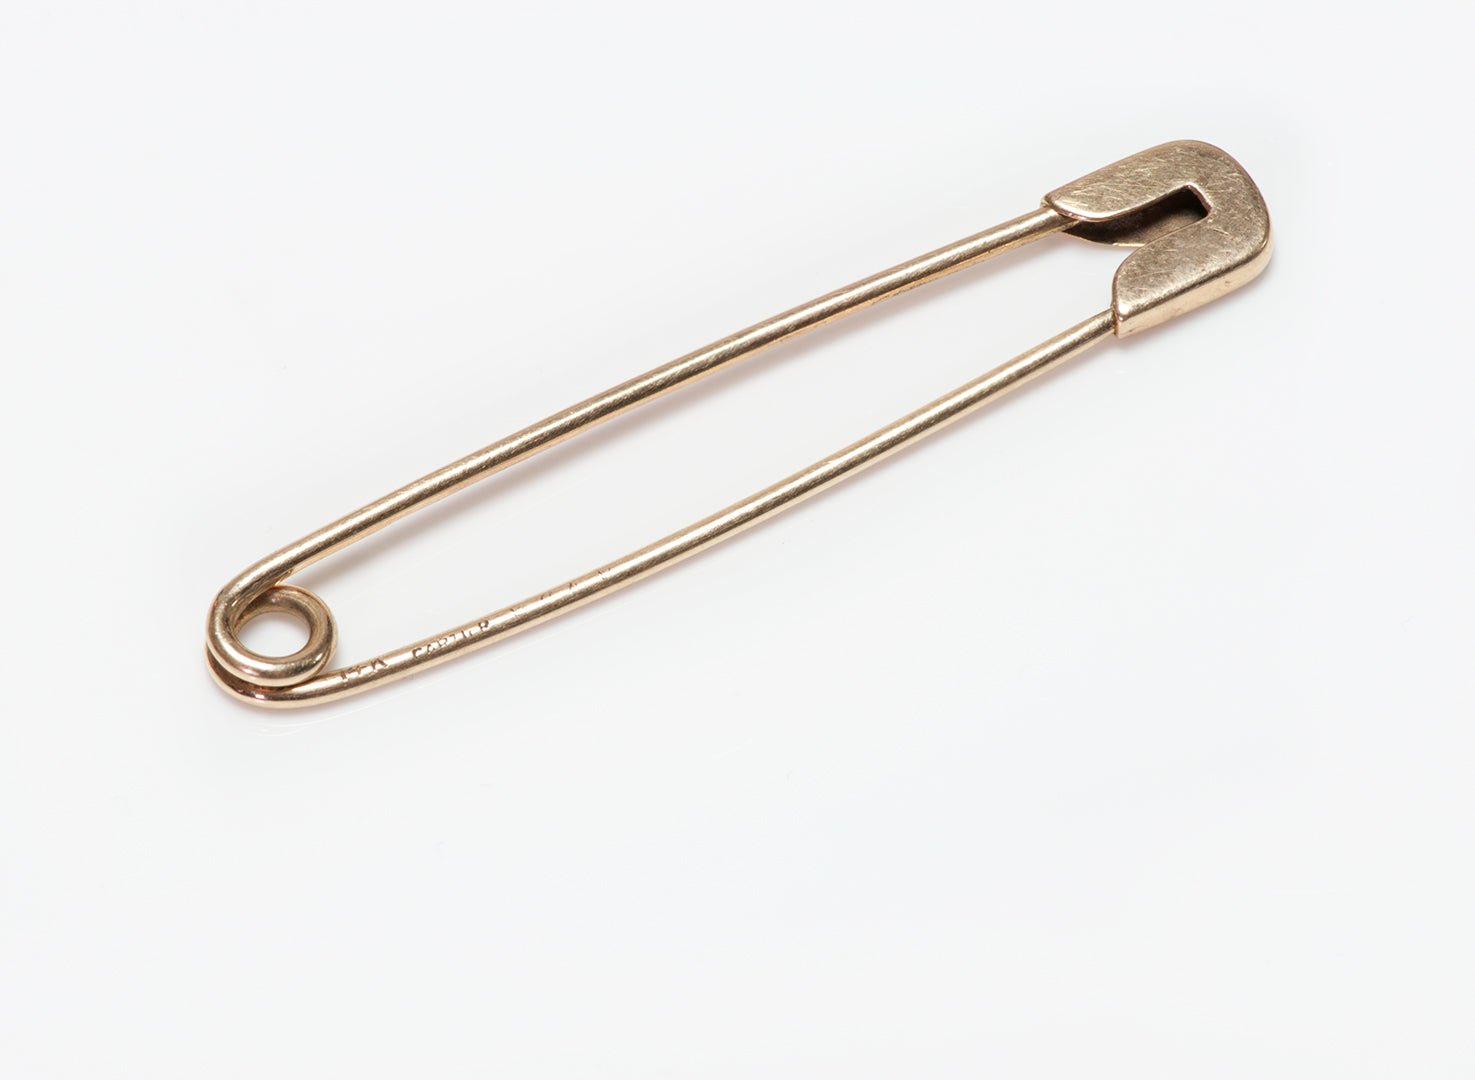 Vintage Cartier 14K Gold Safety Pin